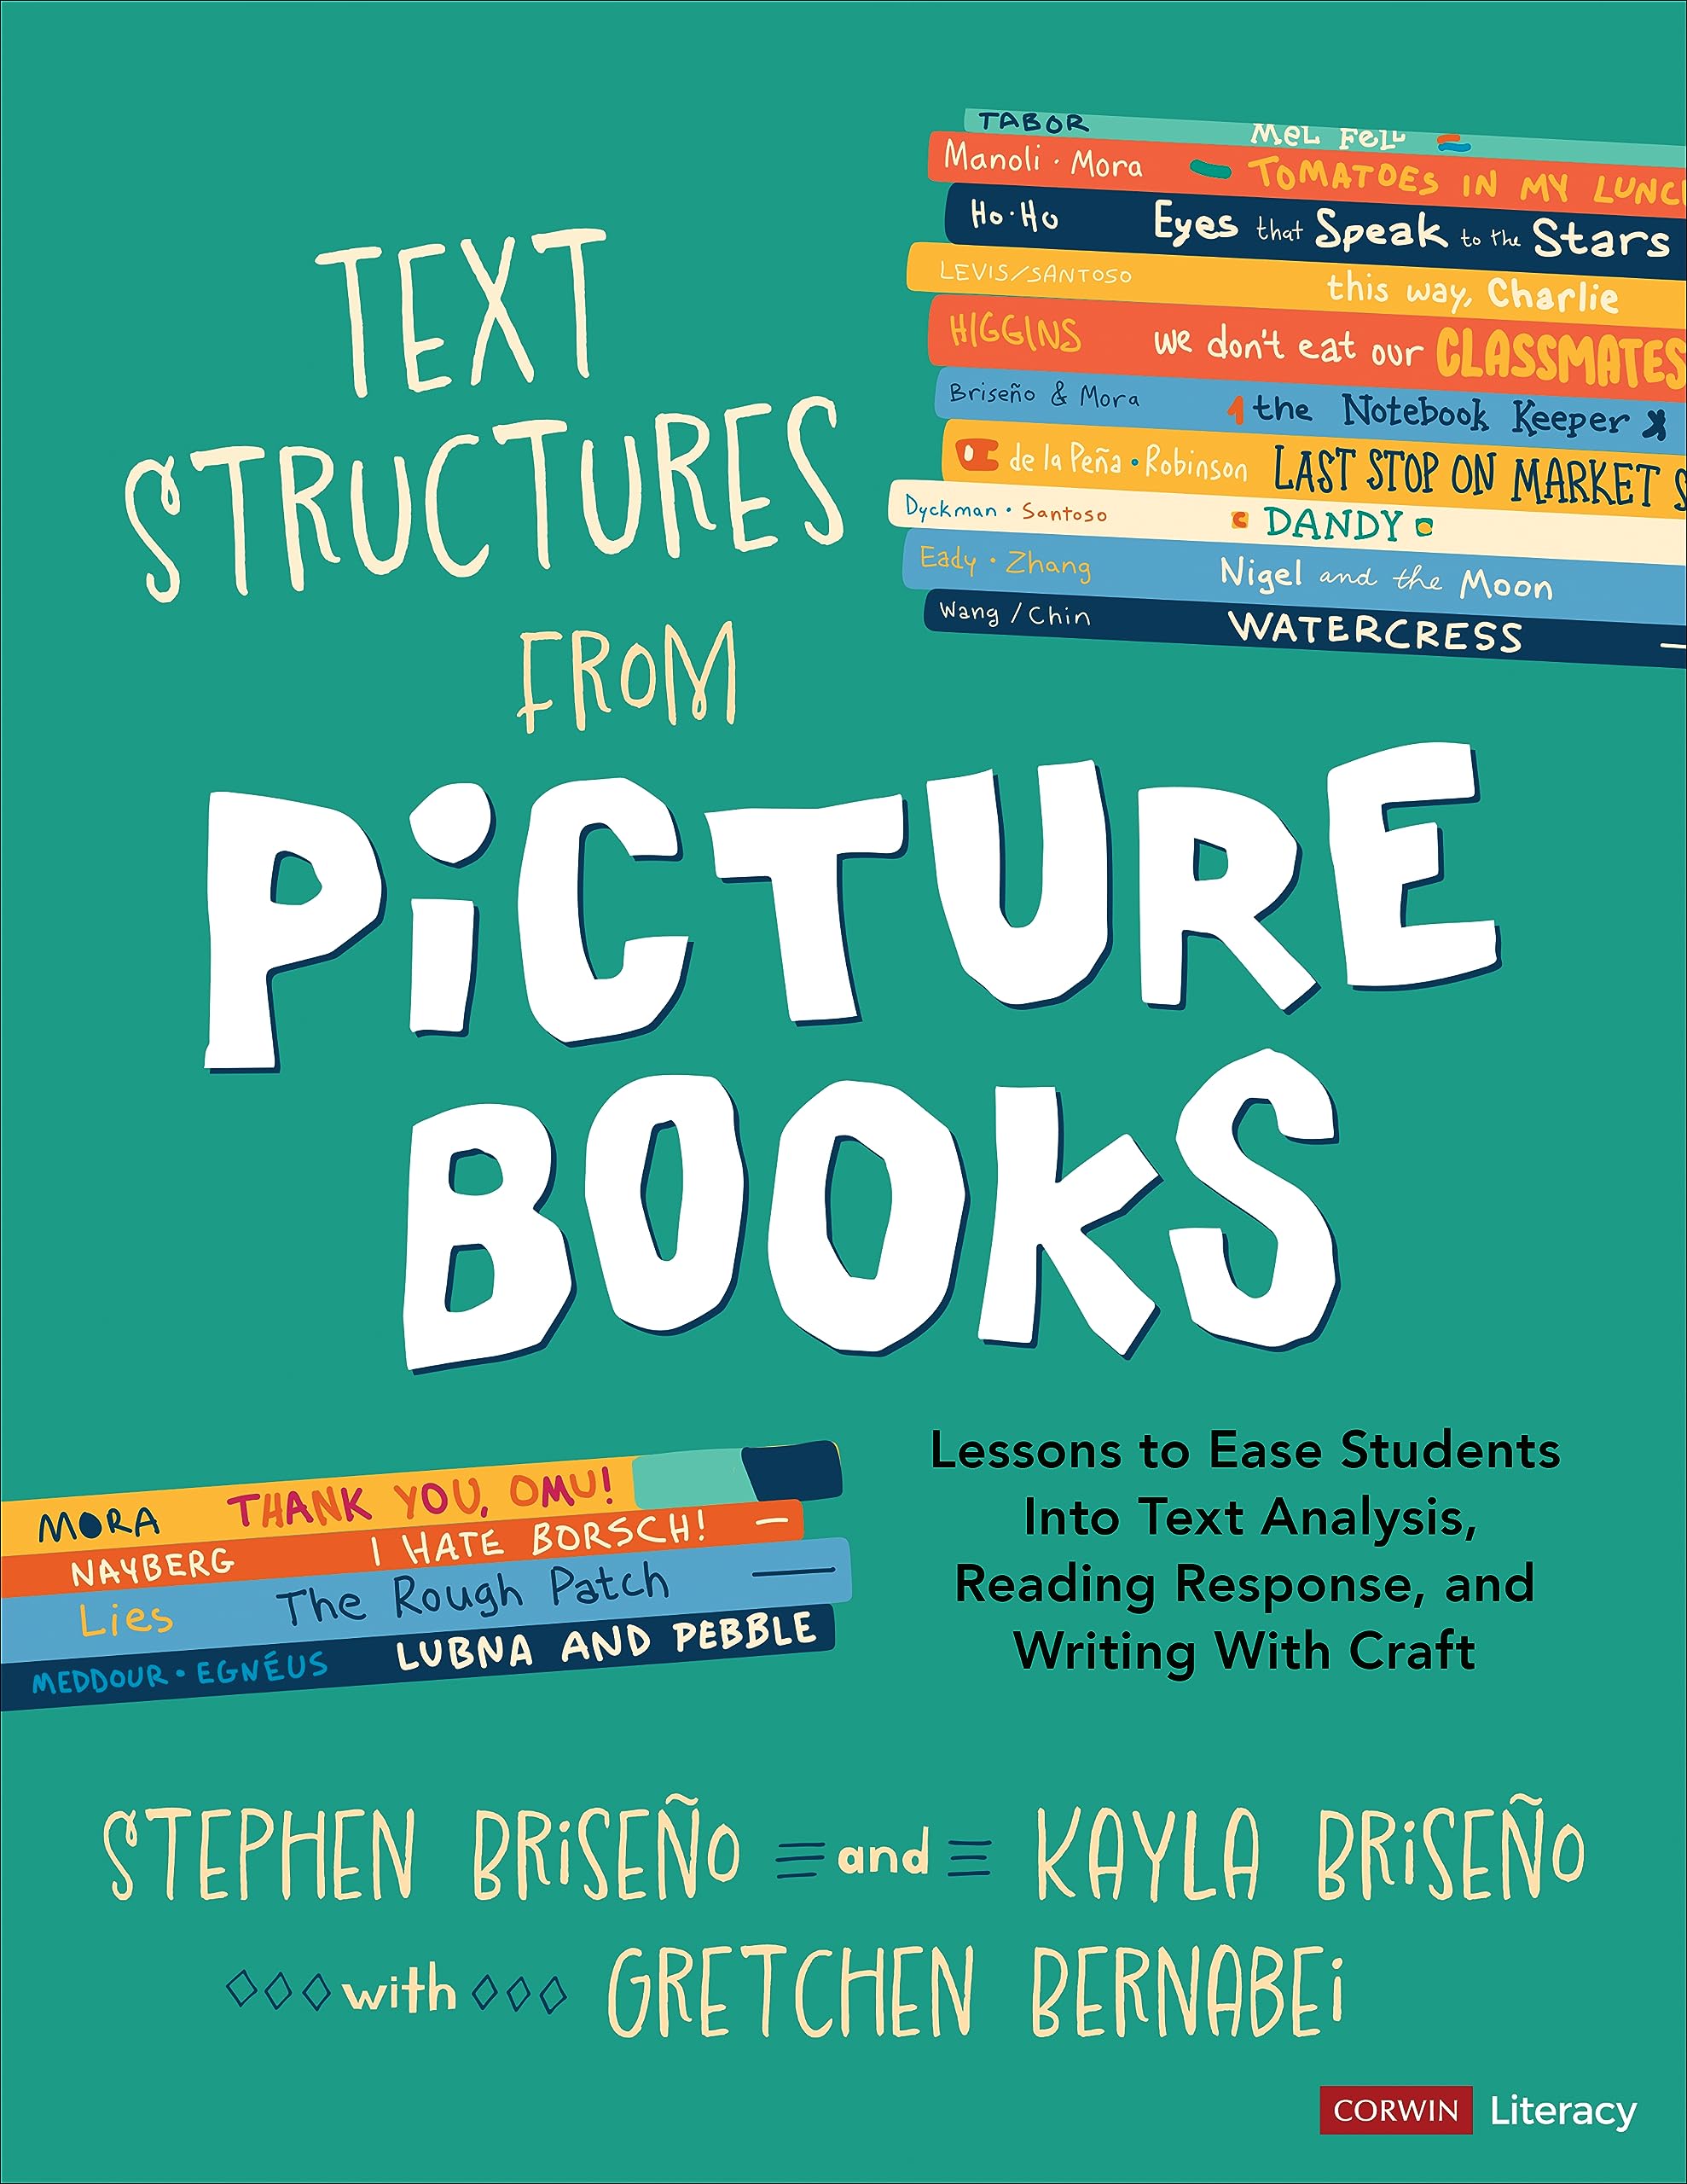 Text Structures From Picture Books [Grades 2-8]: Lessons to Ease Students Into Text Analysis, Reading Response, and Writing With Craft (Corwin Literacy)